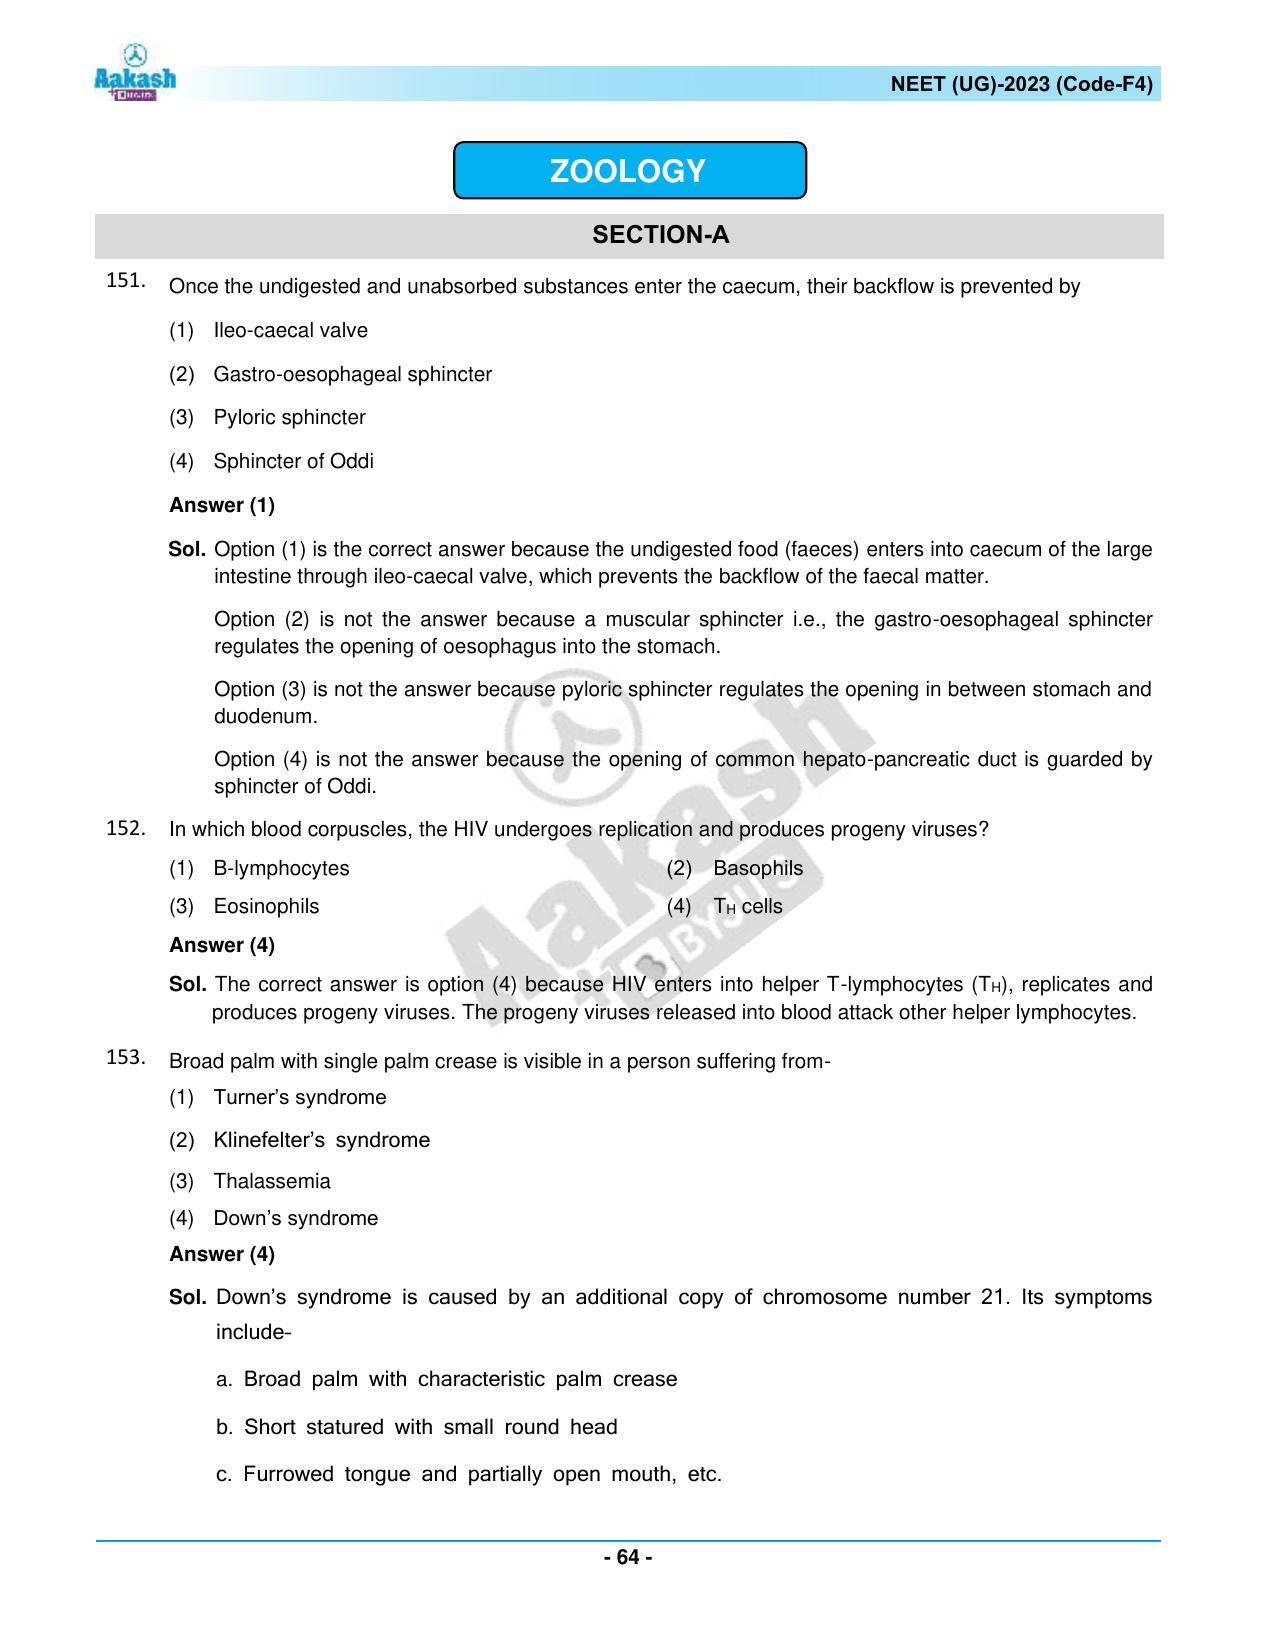 NEET 2023 Question Paper F4 - Page 64